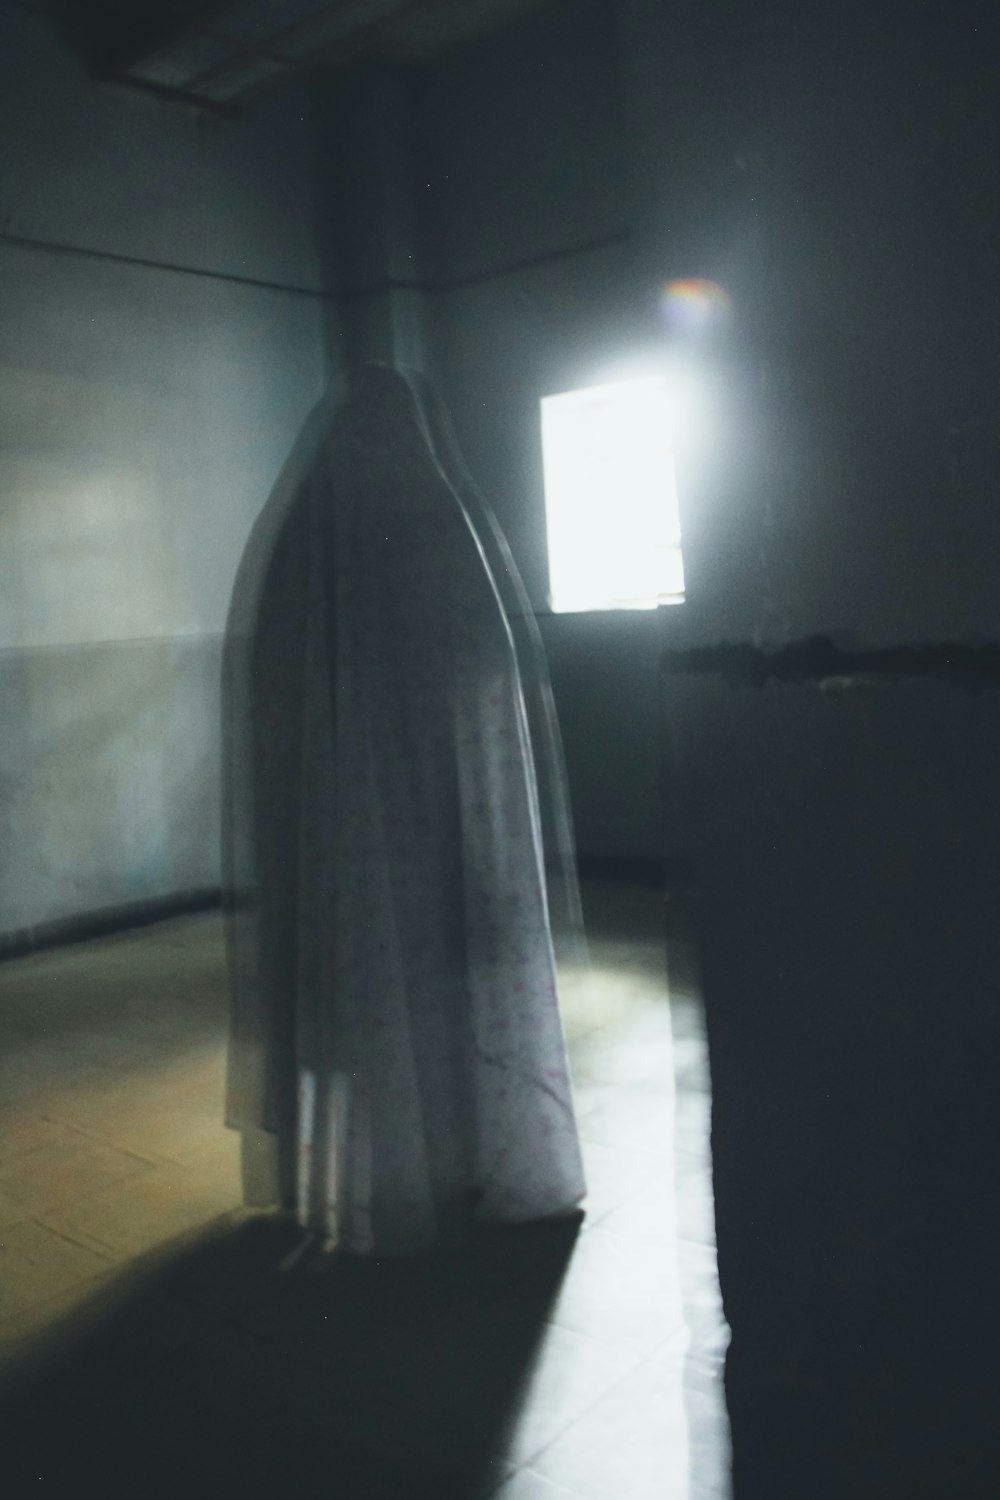 a ghostly figure standing in a dark room